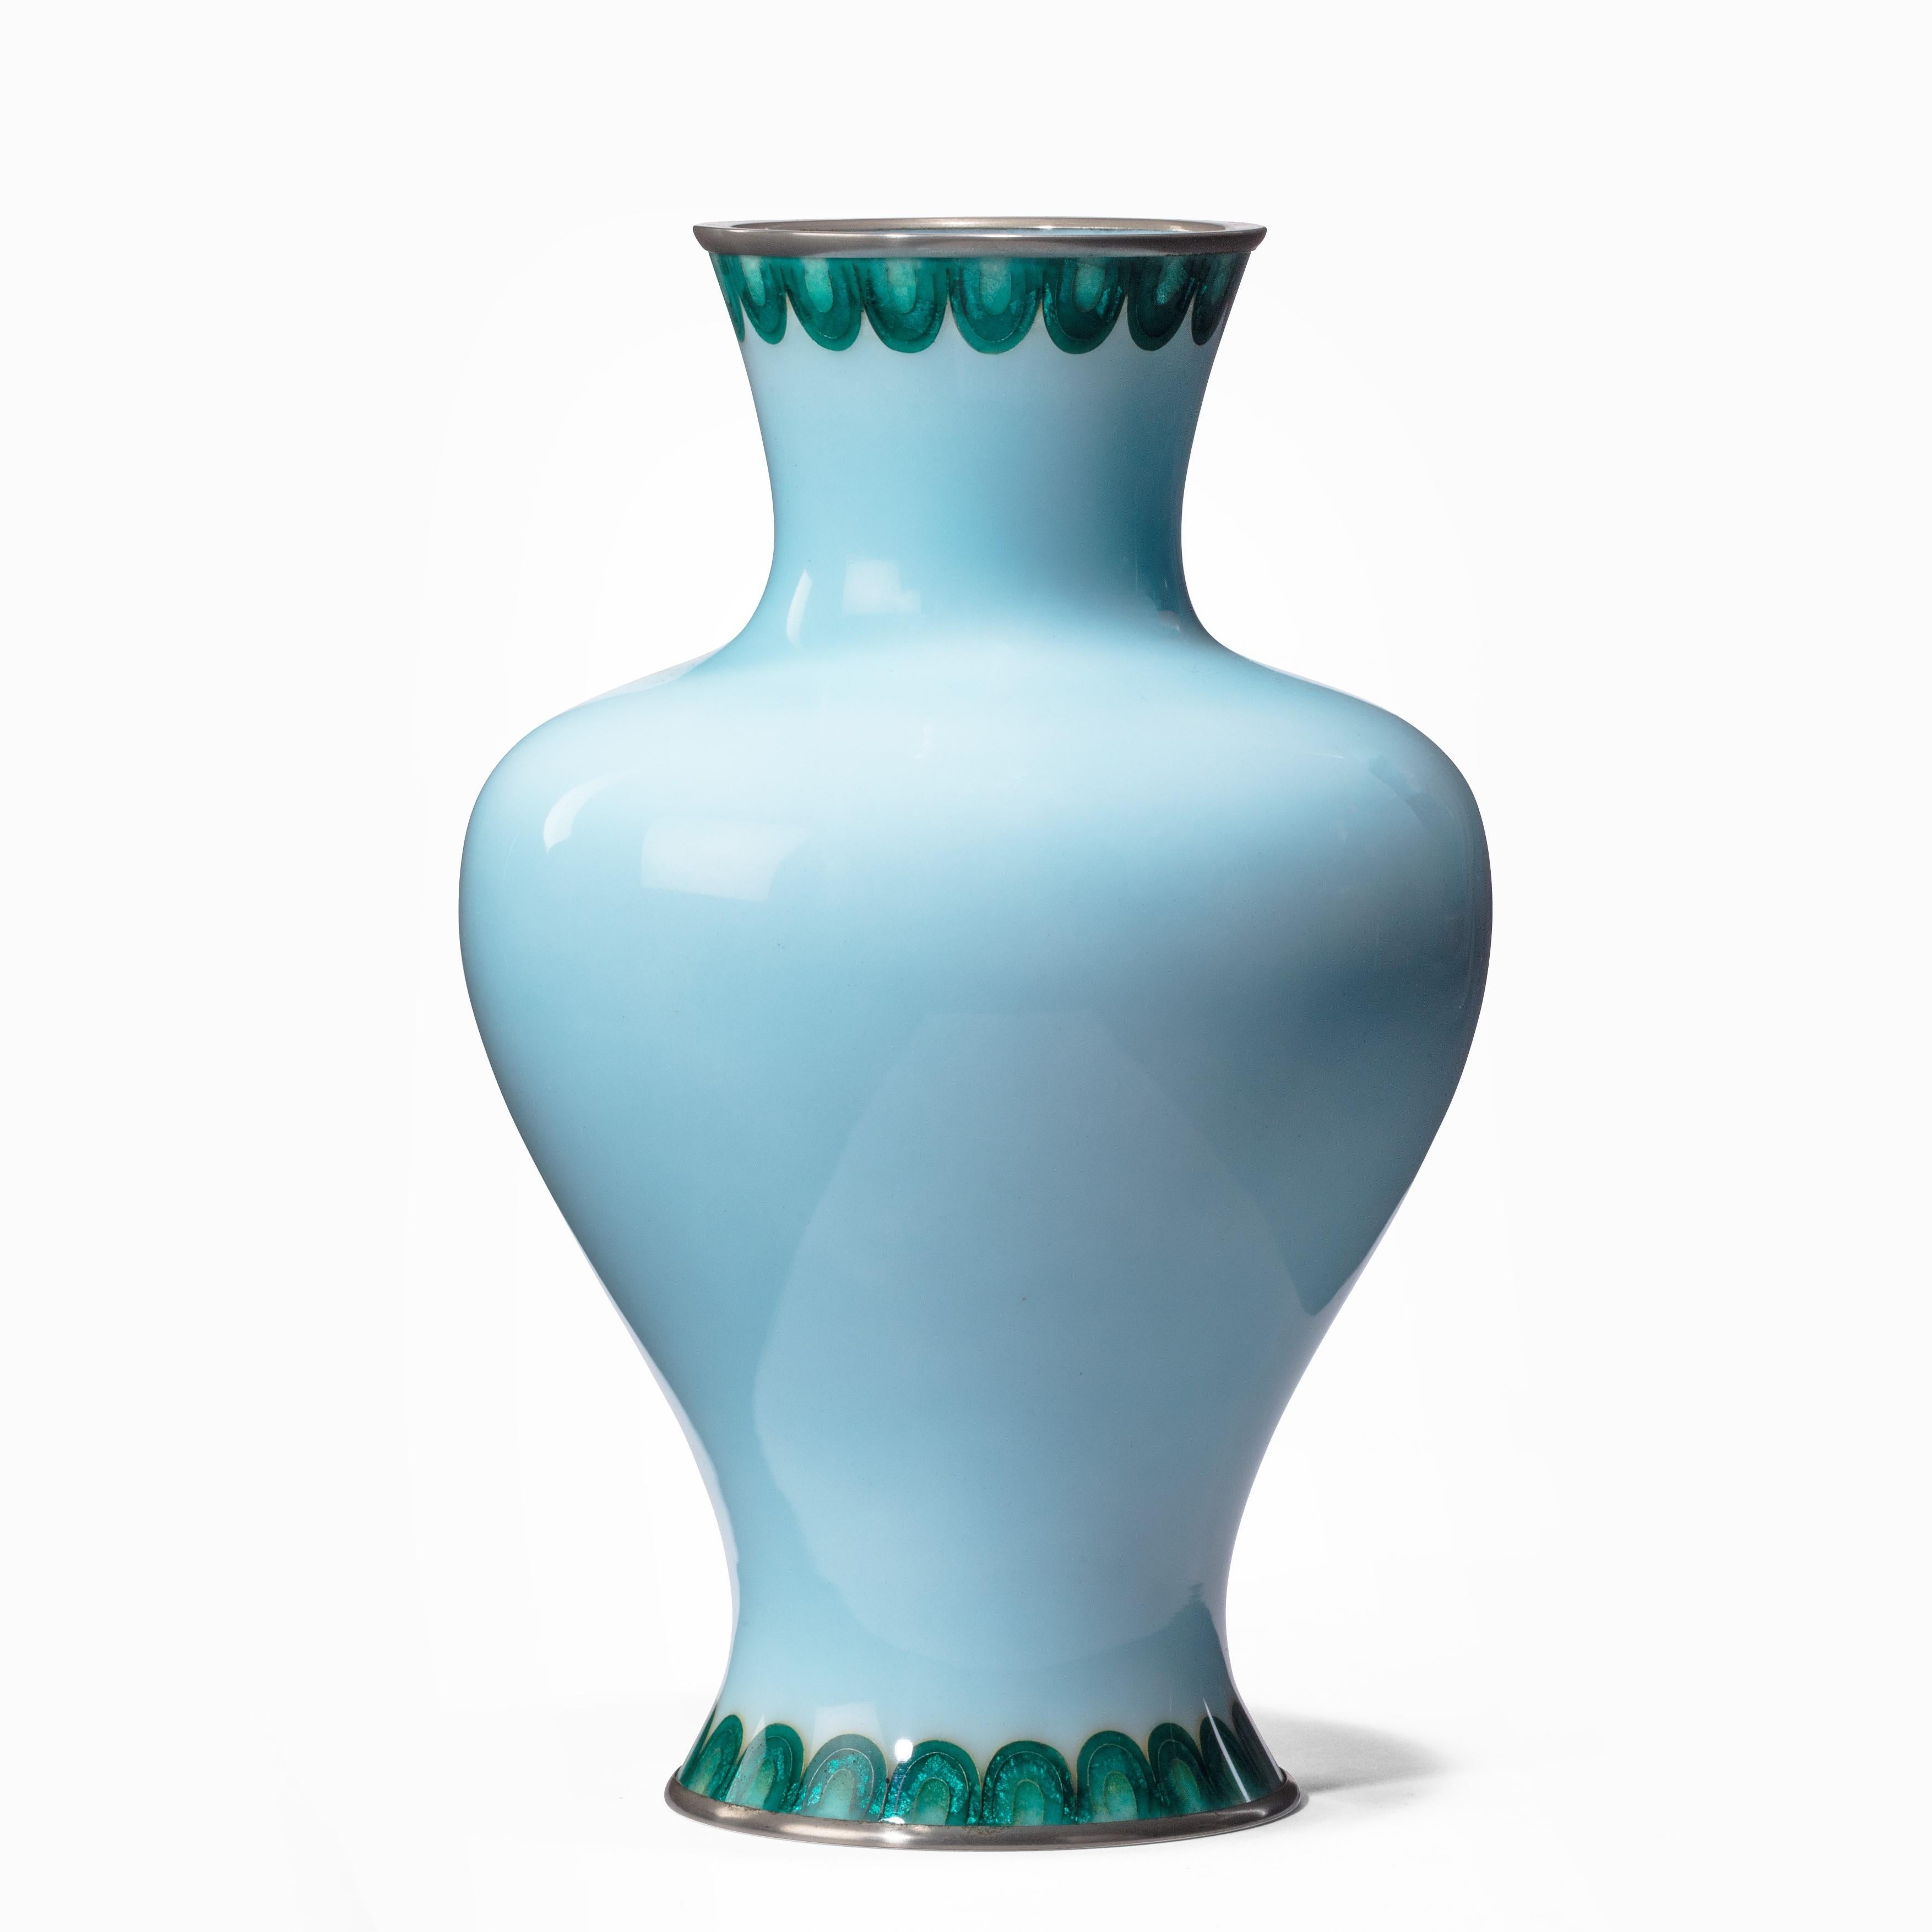 A Showa period pale blue cloisonné vase by Tamura, decorated with a central floral motif of stylized green leaves centred on a turquoise flower with a silver foil gin-bari centre, with similar gin-bari collars of petals round the rim and foot, the